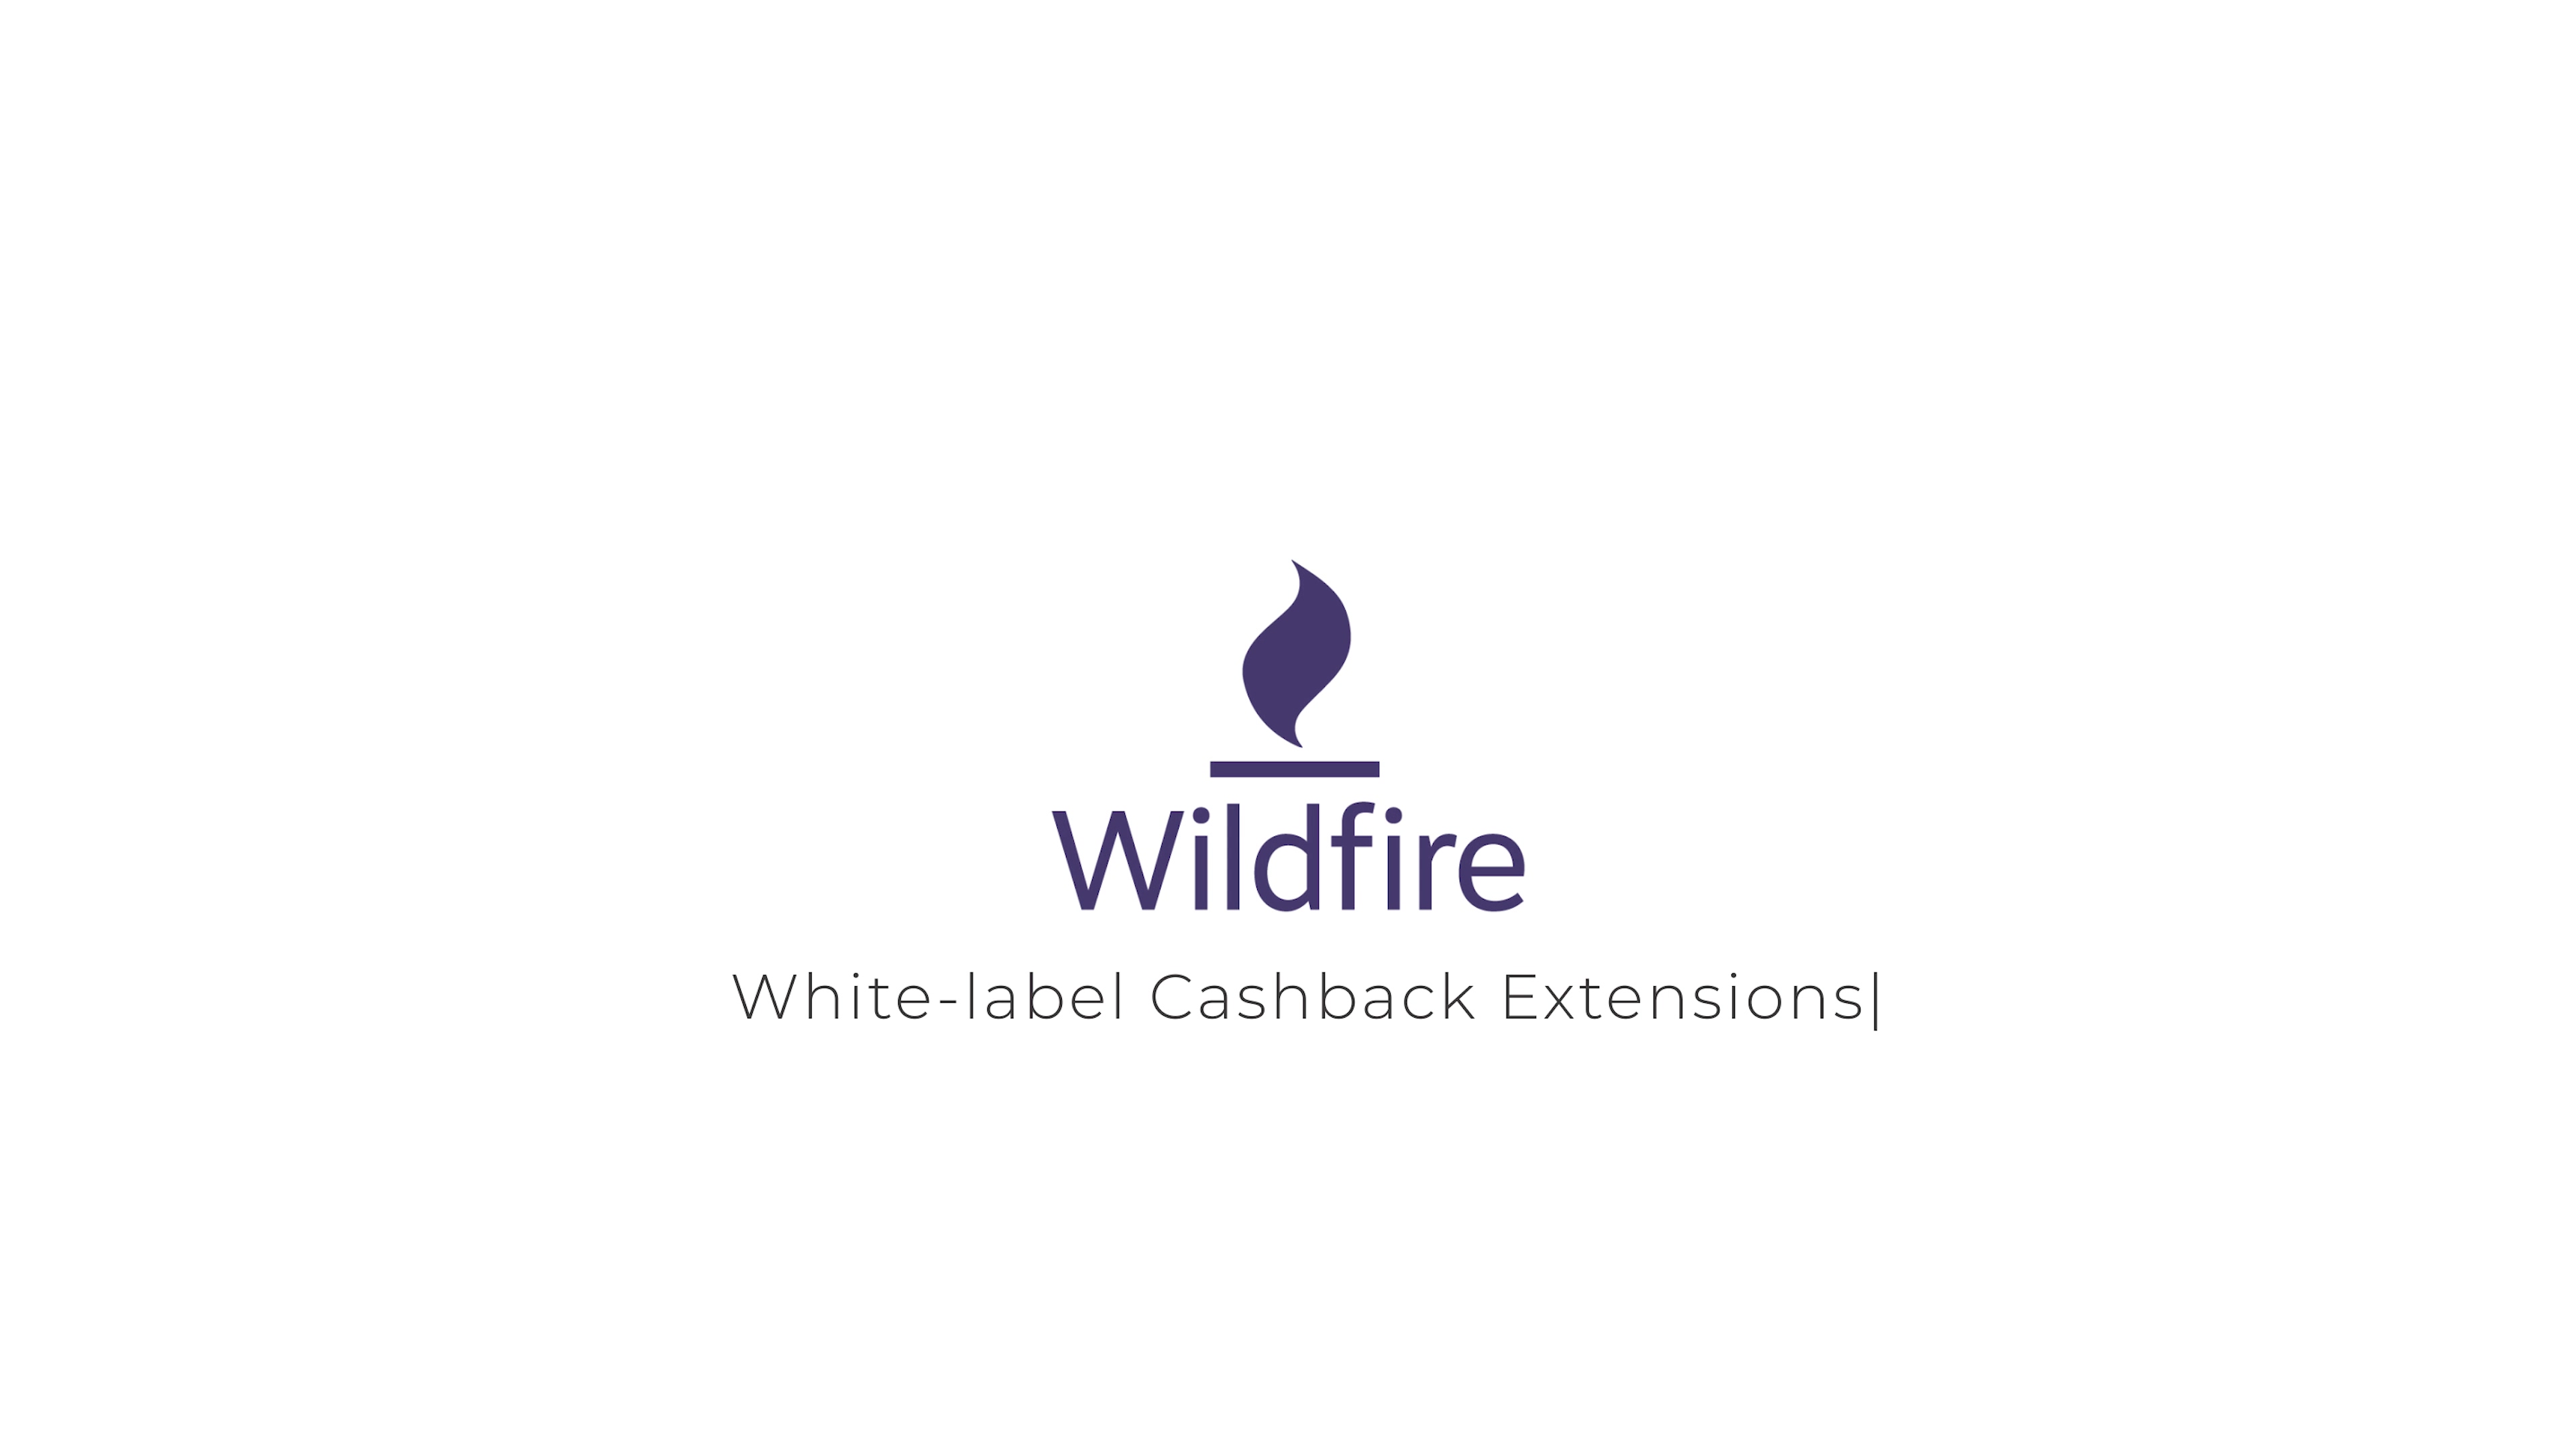 Wildfire | Browser Extension [no captions]